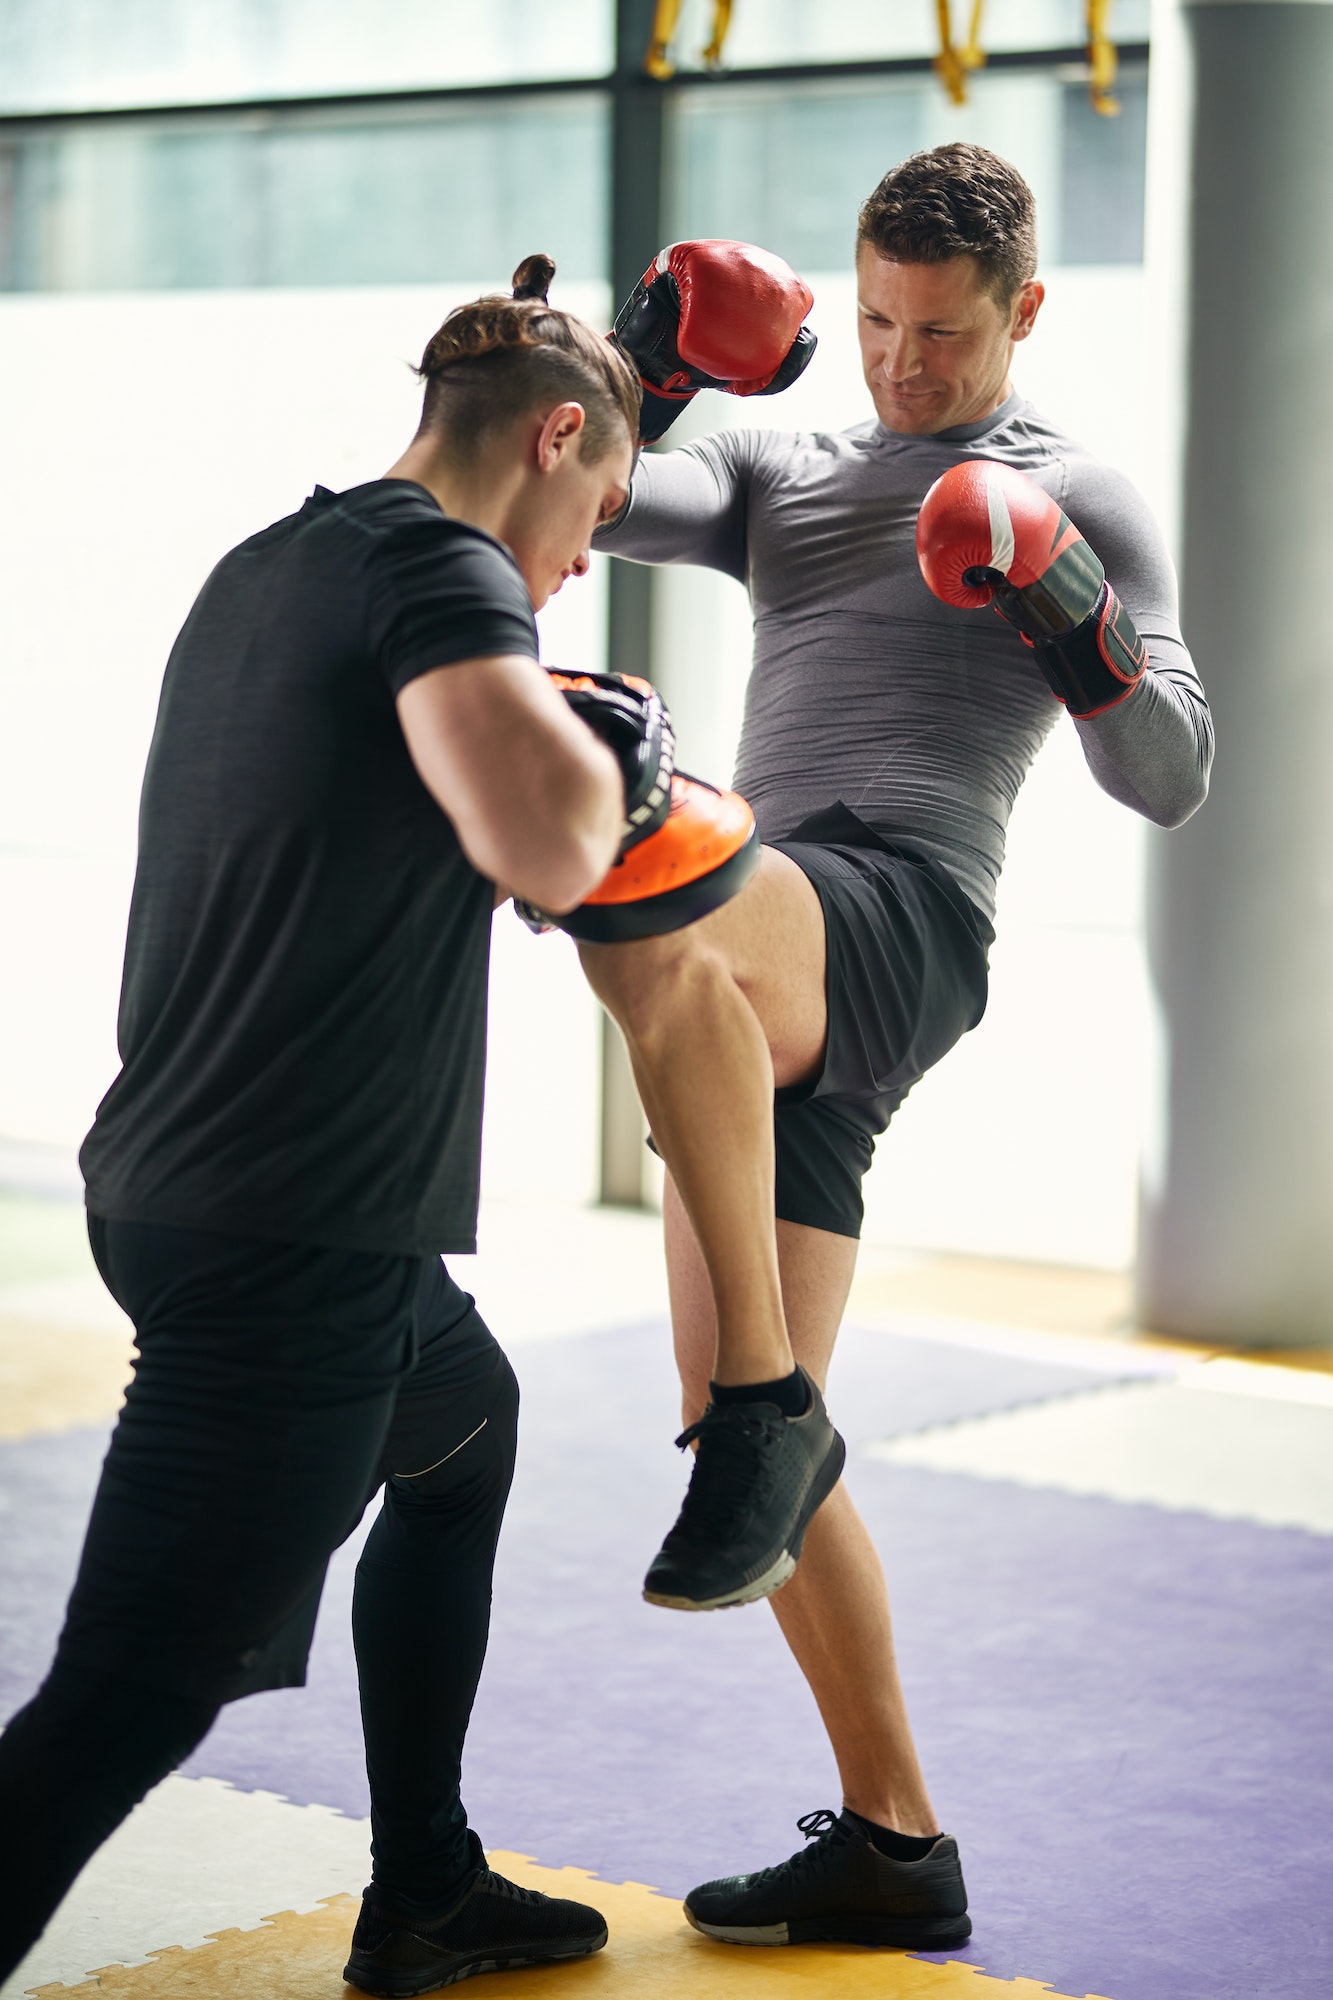 Dedicated Athletic Man Having Kickboxing Training With His Coach In A Gym.